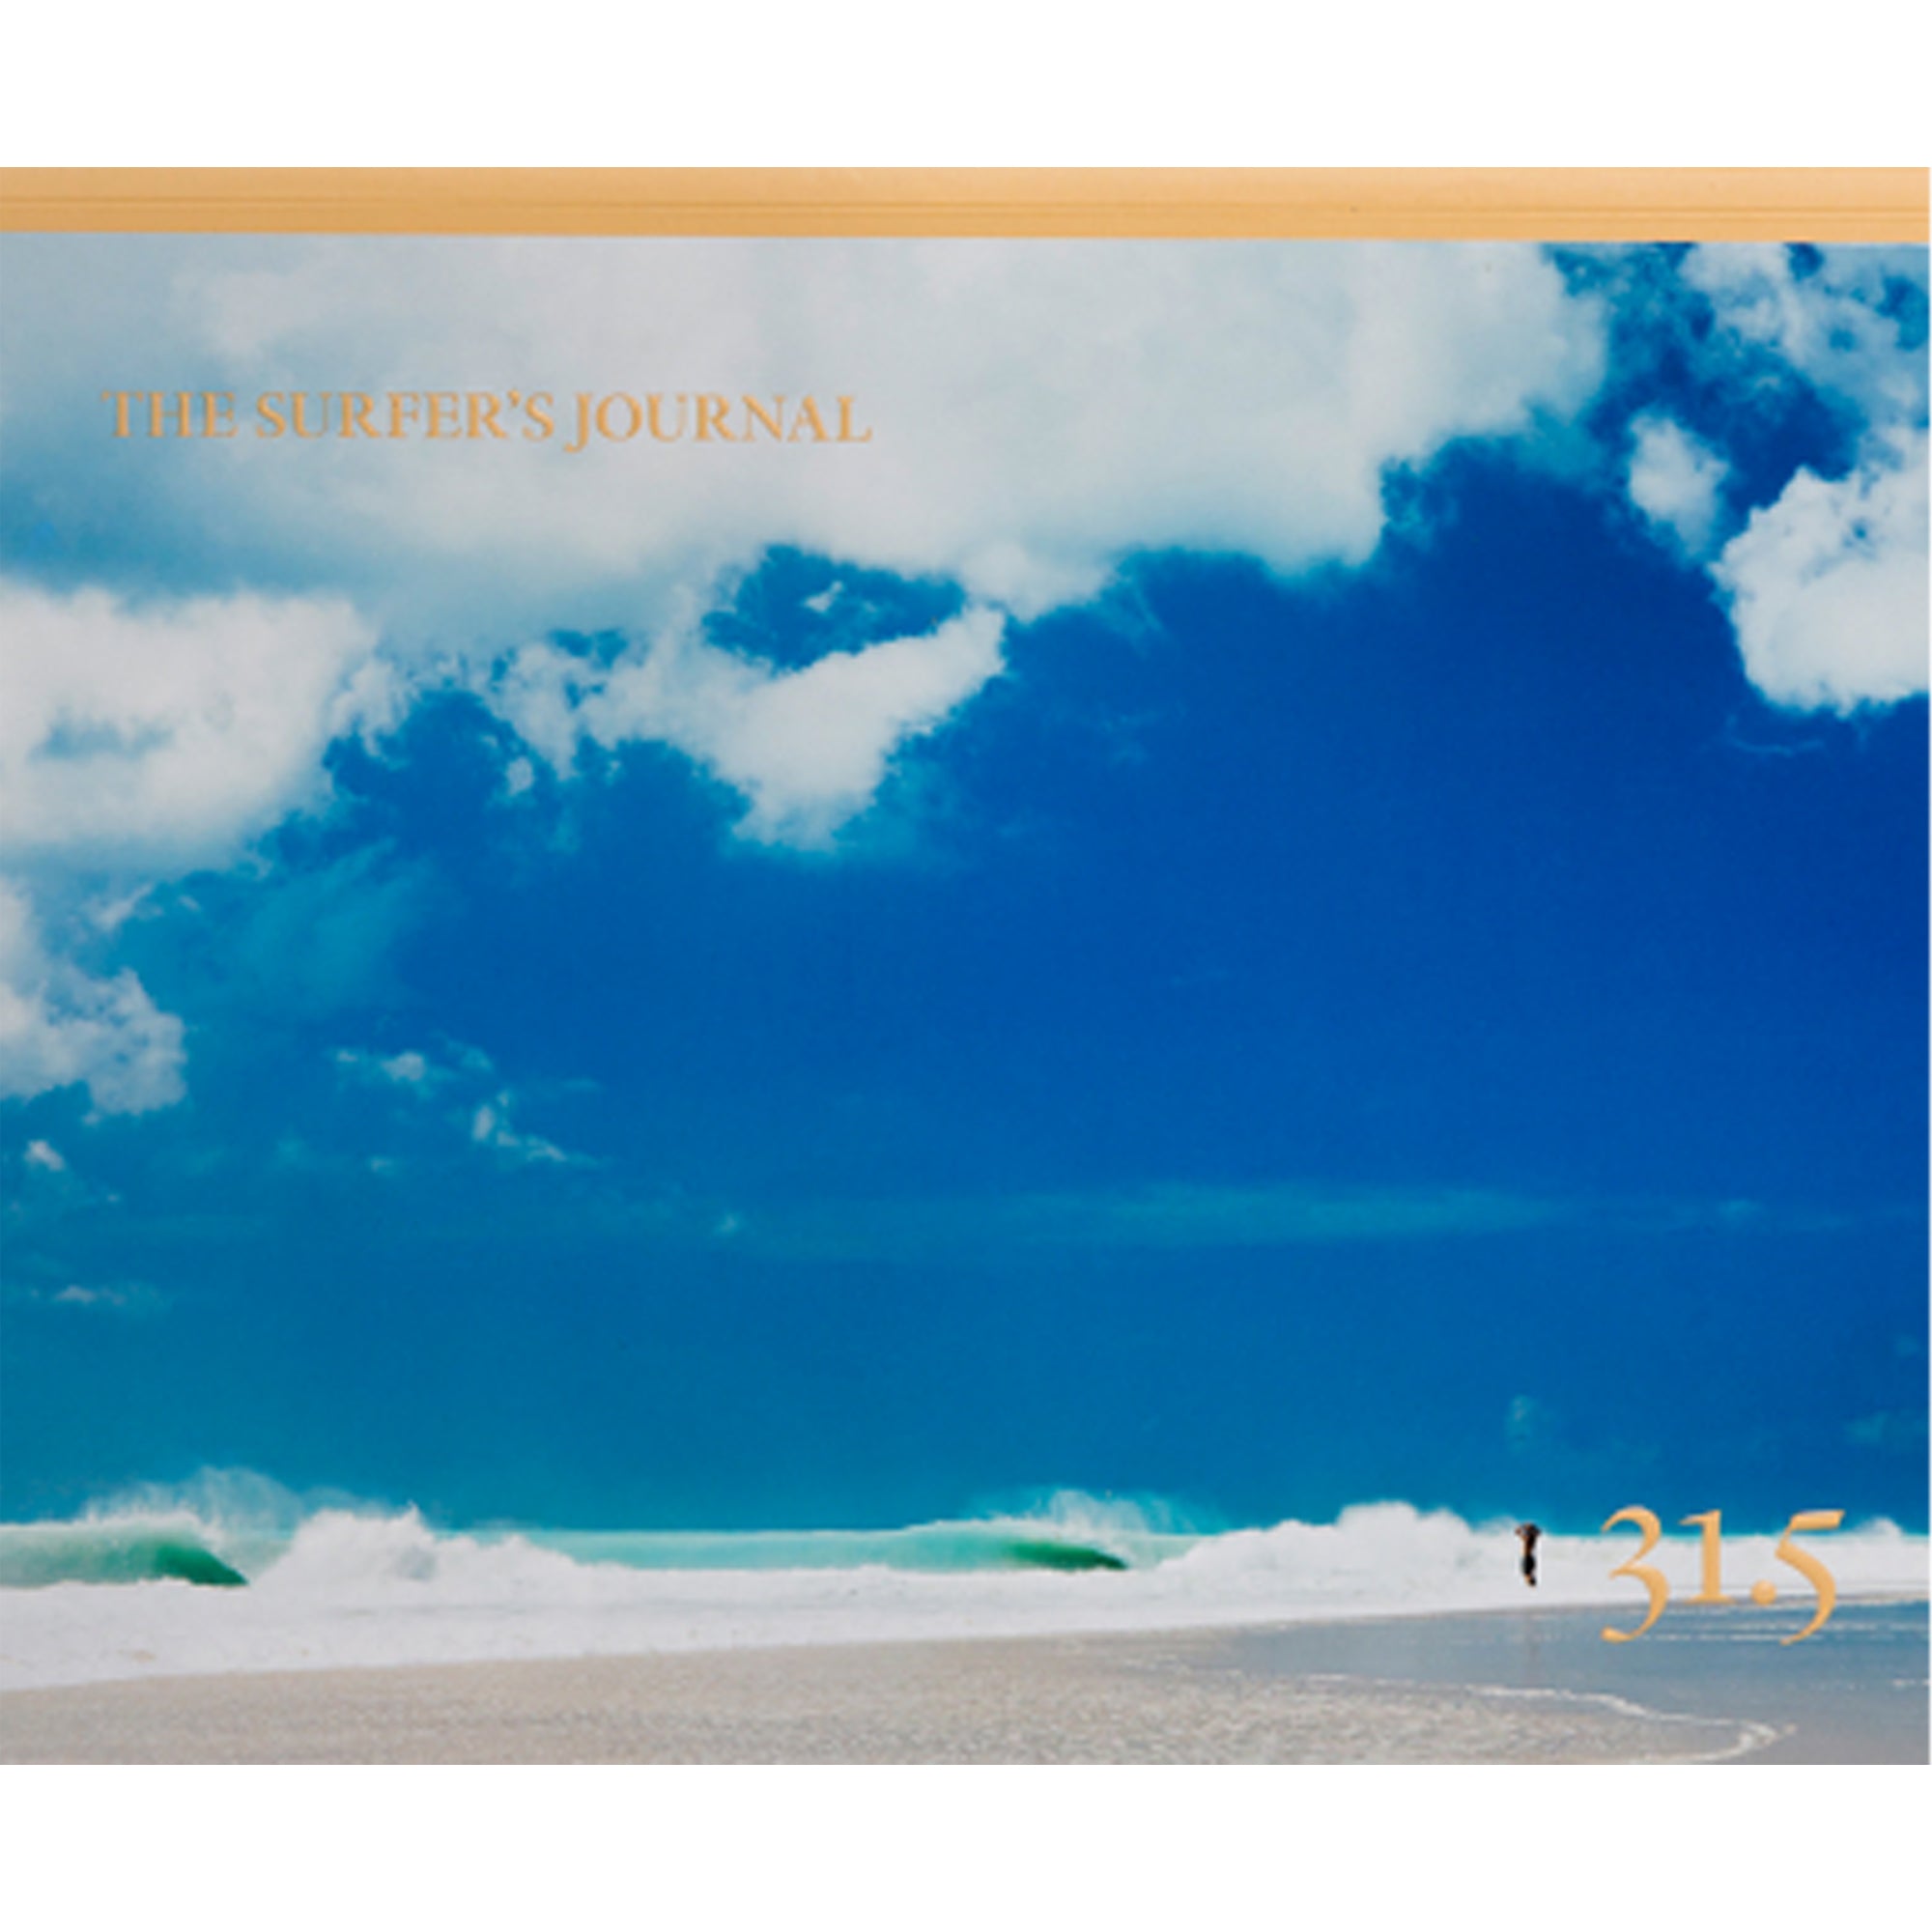 The Surfer Journal #31.5